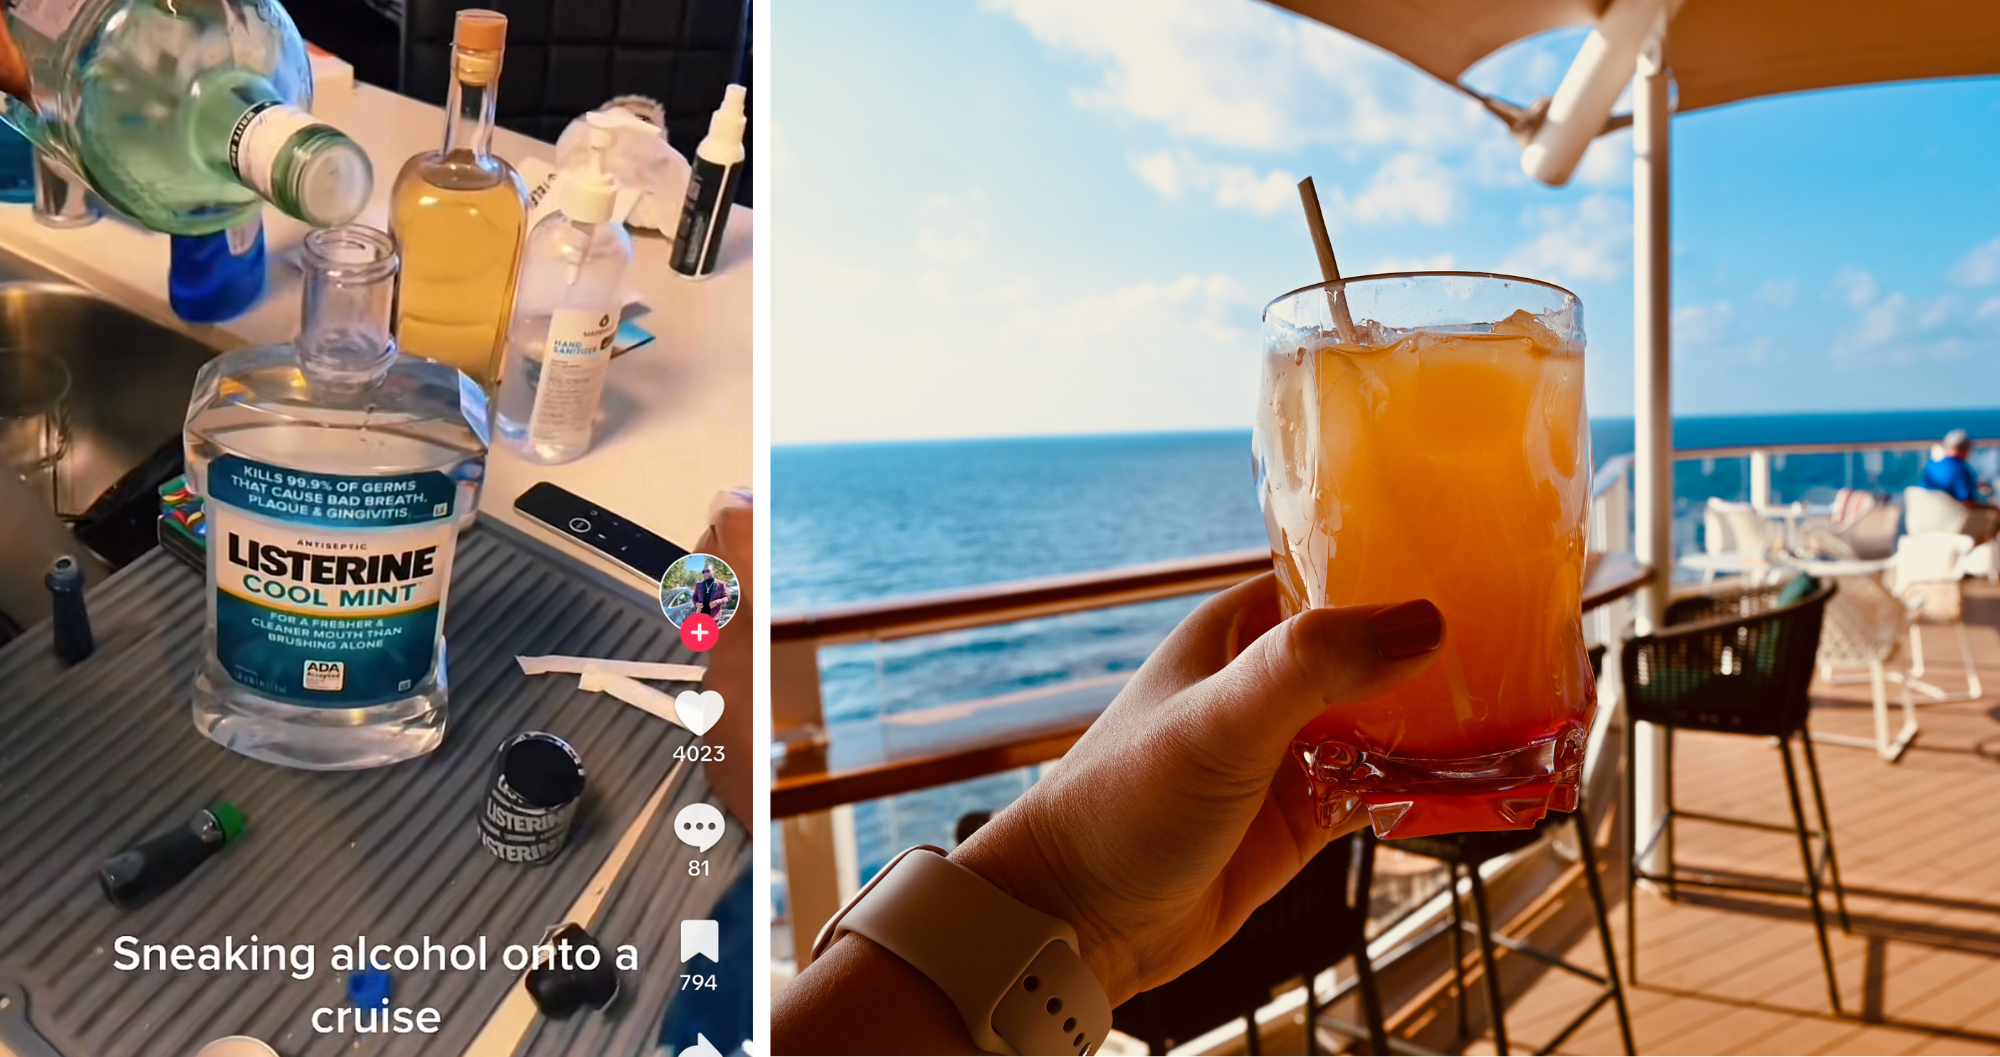 Customer Shows Hack For Sneaking Alcohol Onto Cruise